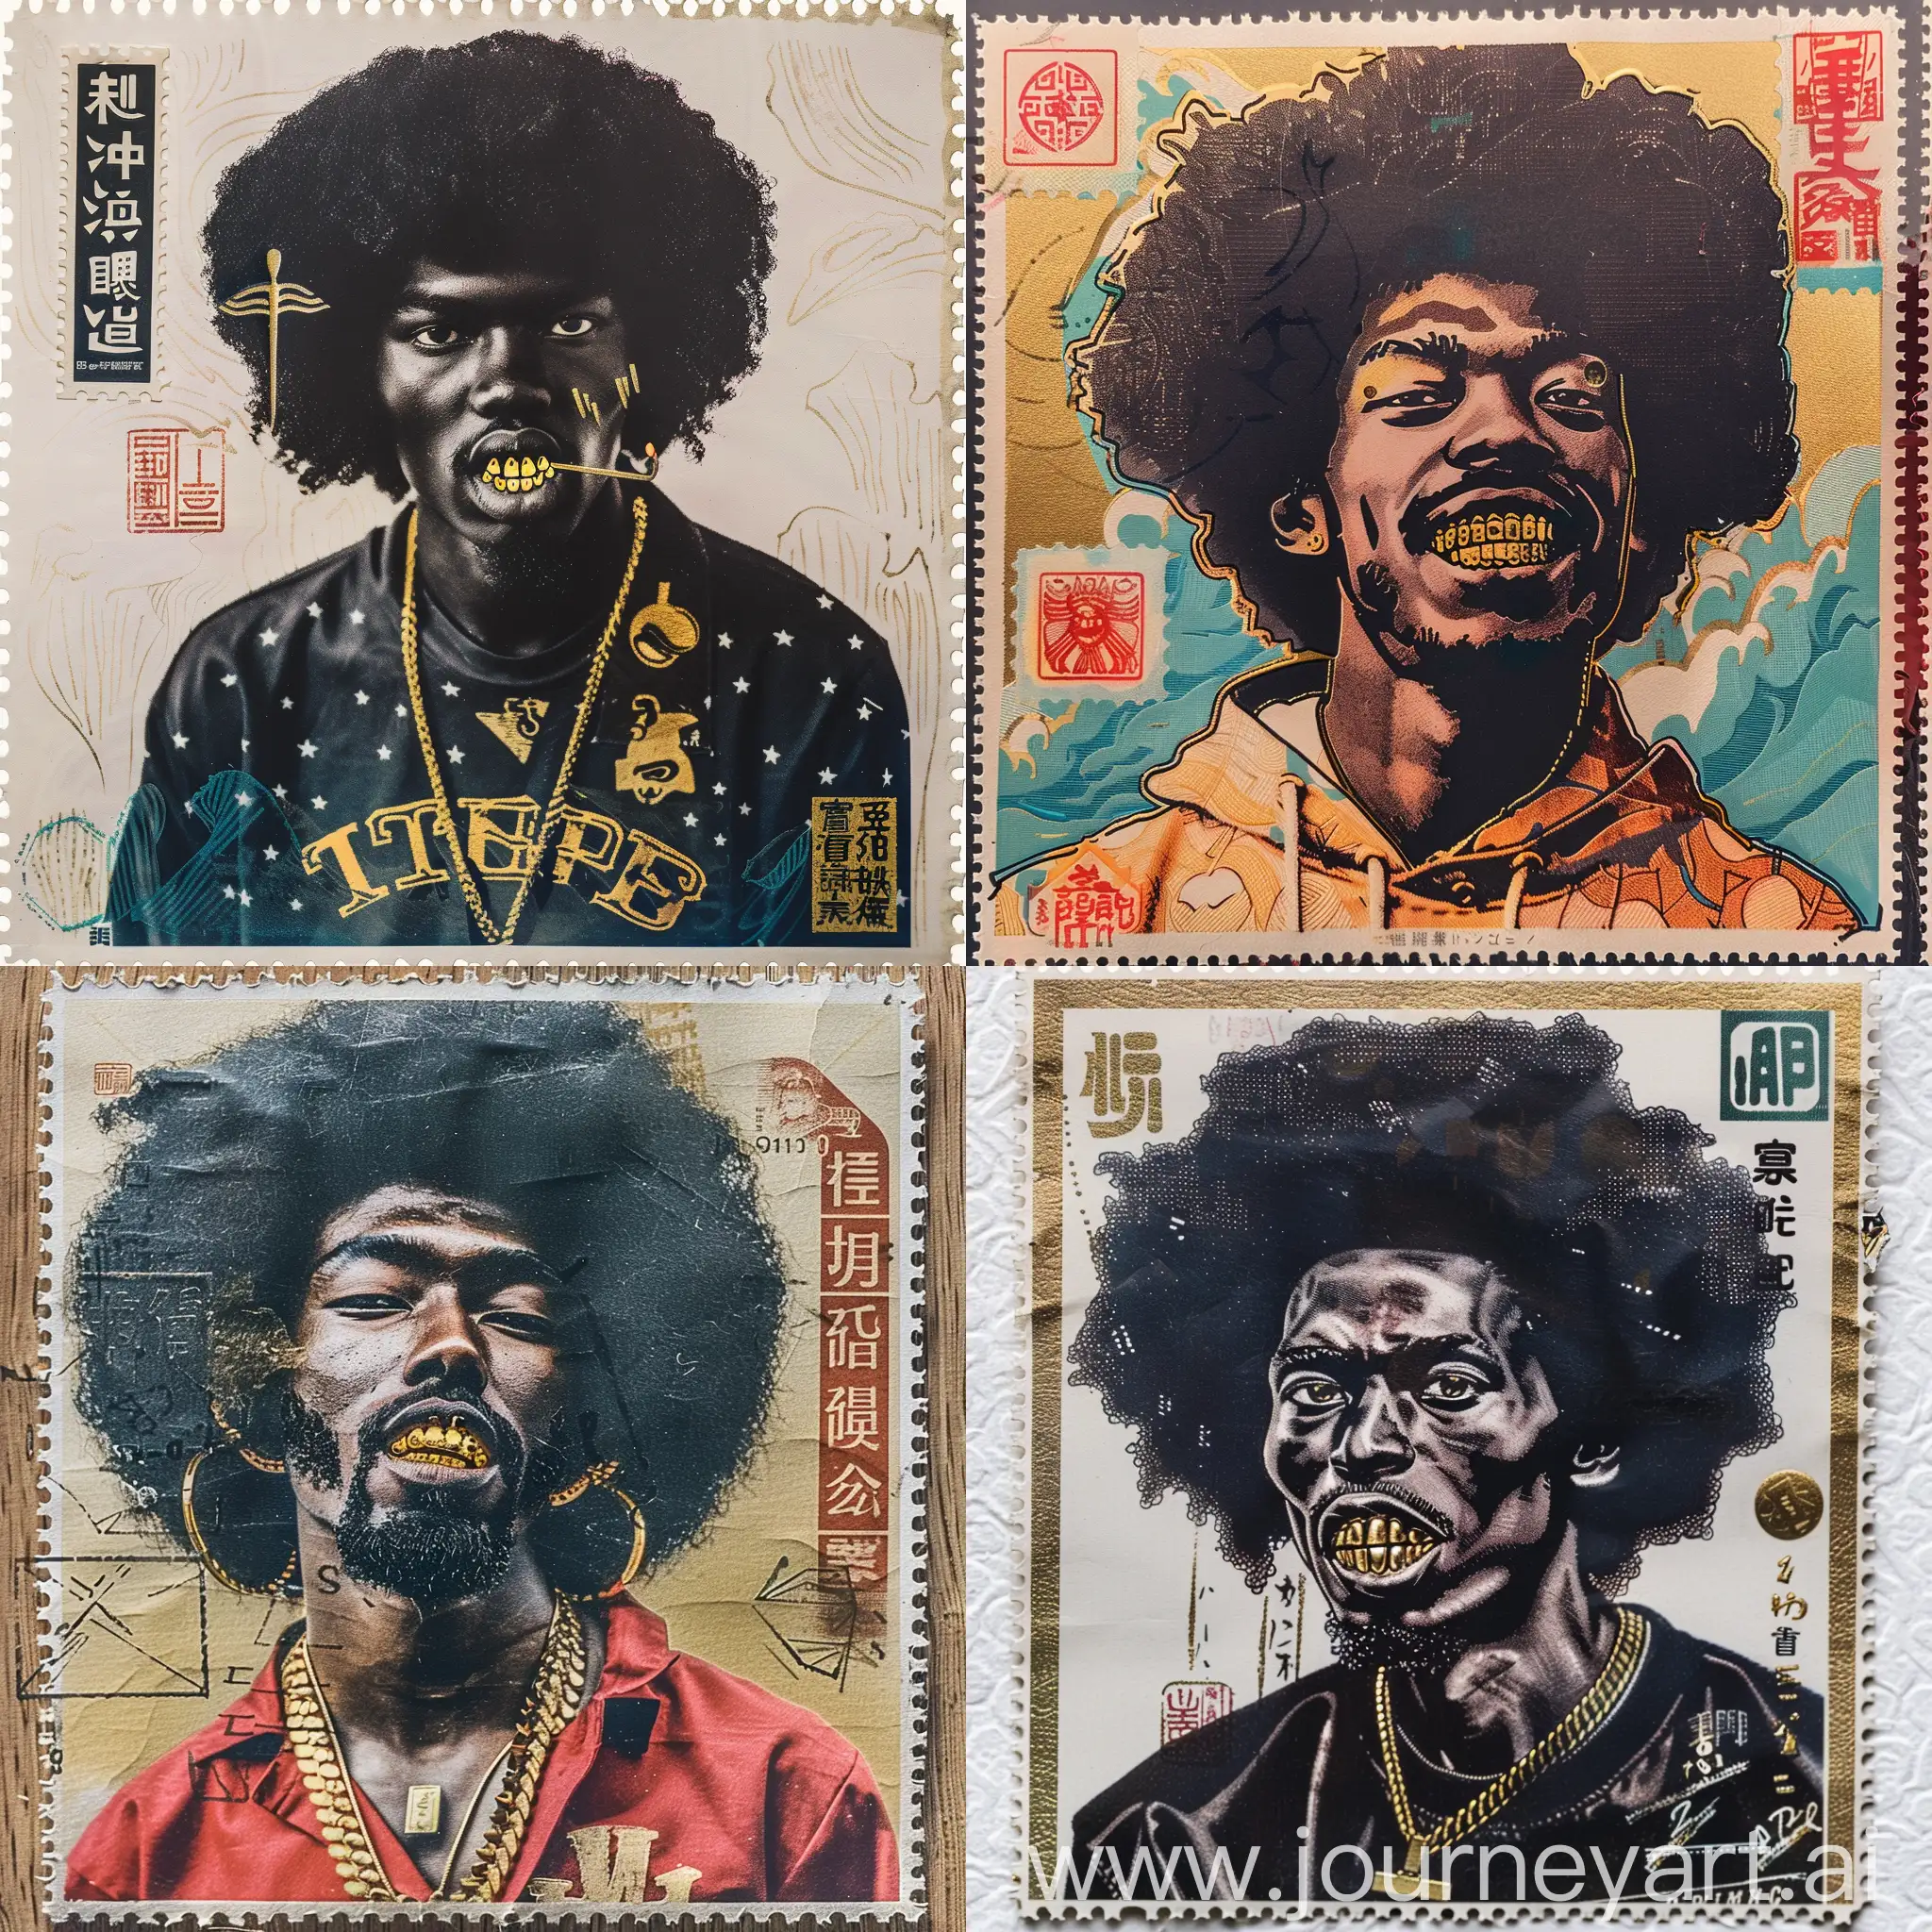 Stylish-Afro-American-Man-in-Streetwear-on-Vintage-Japanese-Postage-Stamp